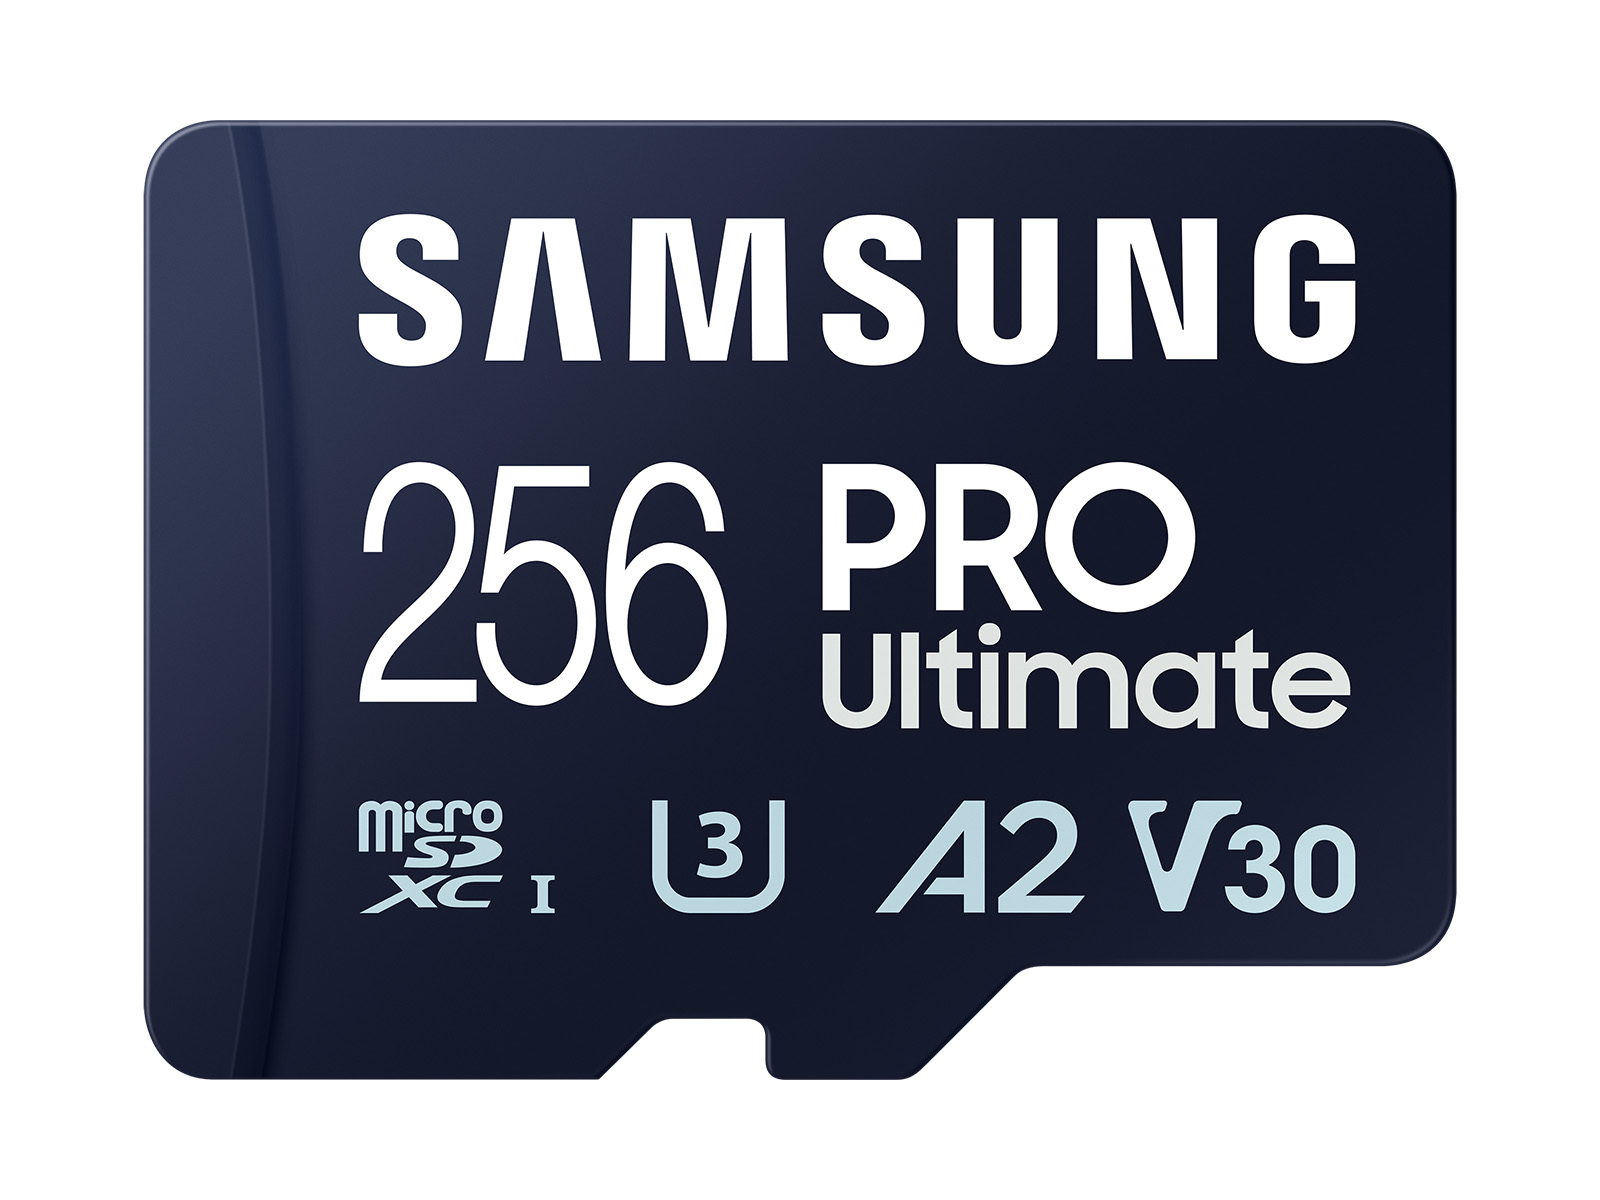 128GB PRO Ultimate + Adapter MicroSD Card External Storage Device